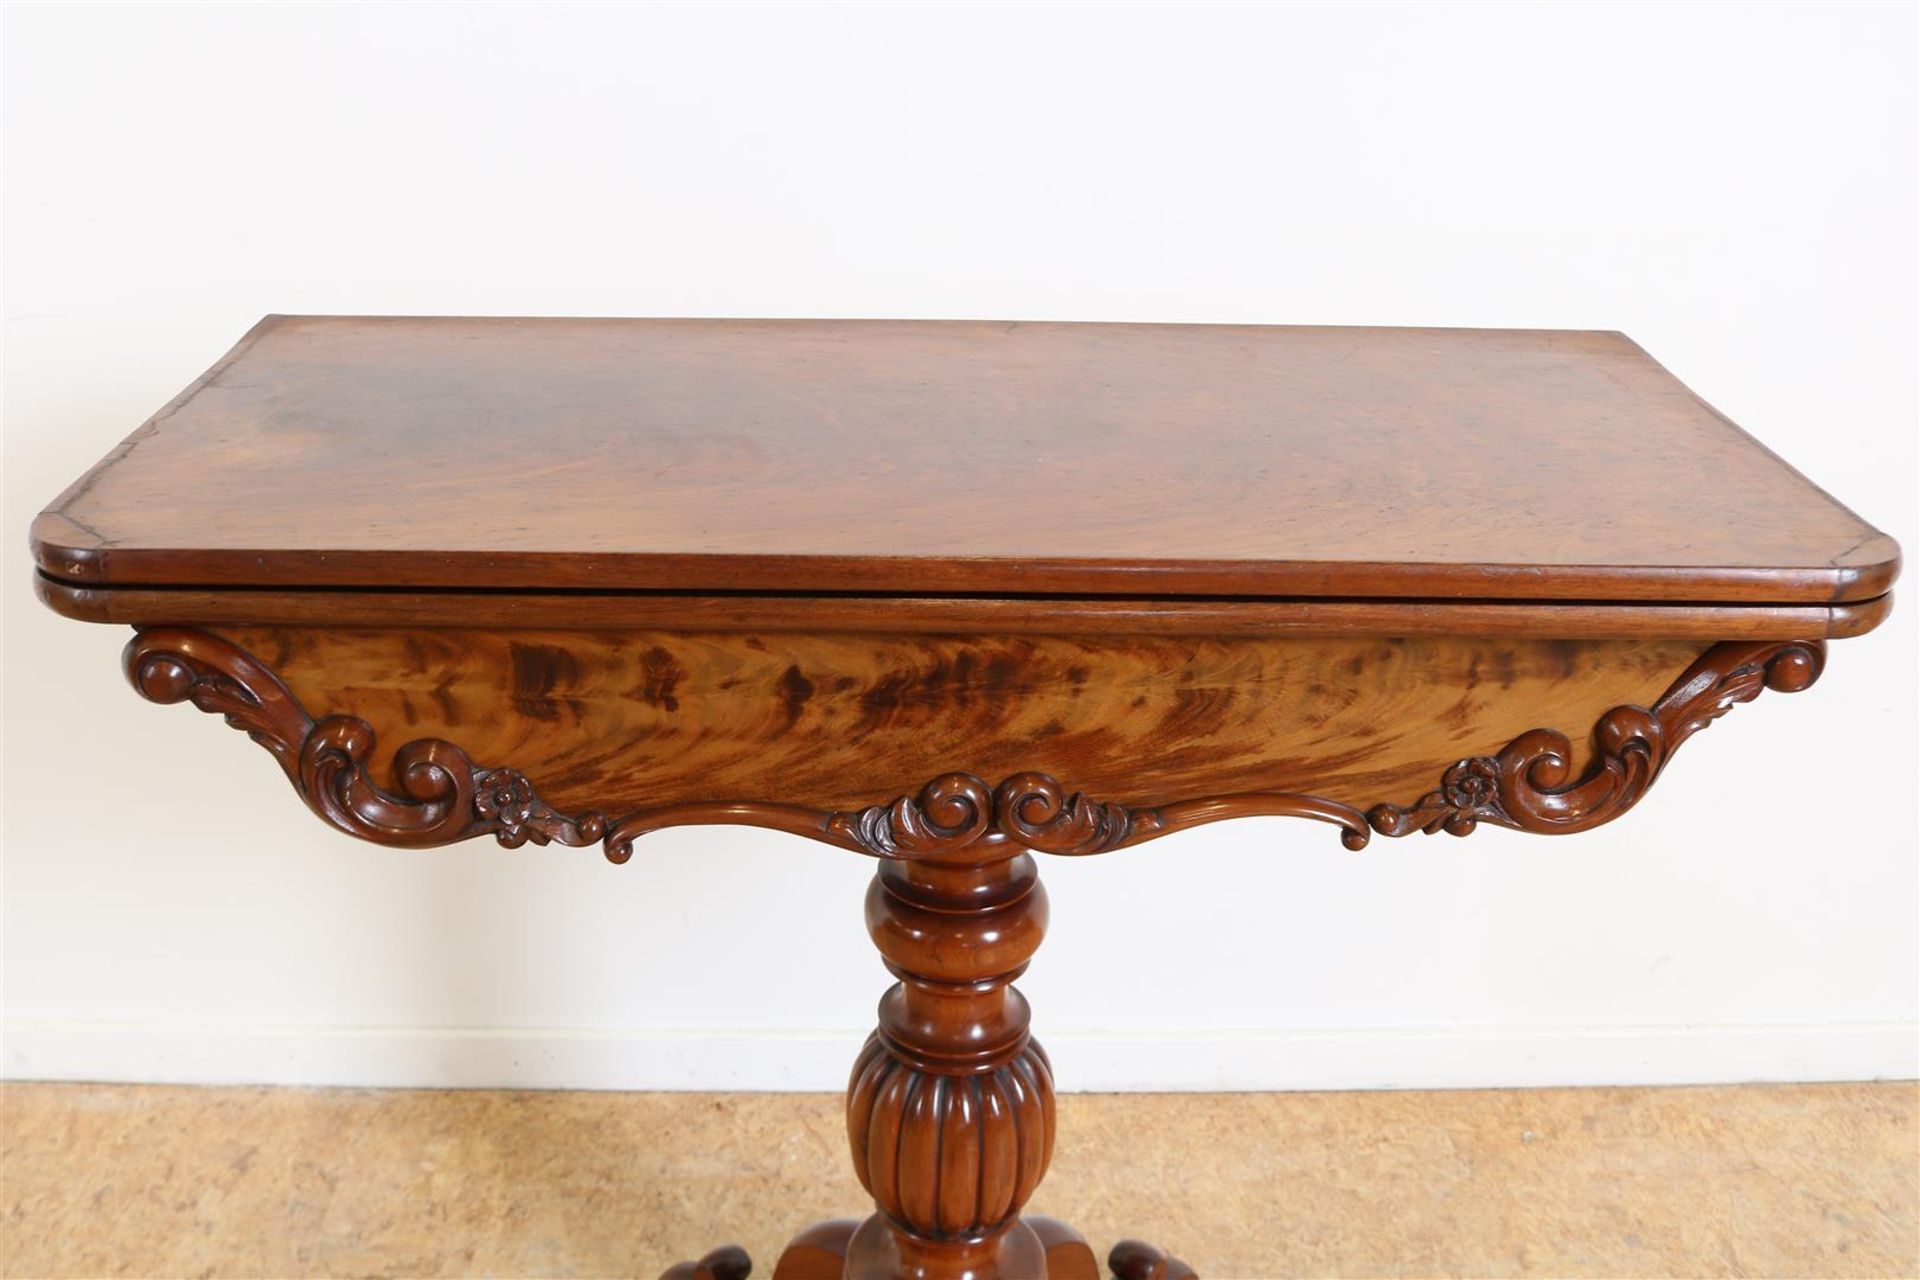 Mahogany gaming table on 4 sprant, 19th century, veneer damage to top, h. 76, w. 82, d. 40 cm. - Image 2 of 6